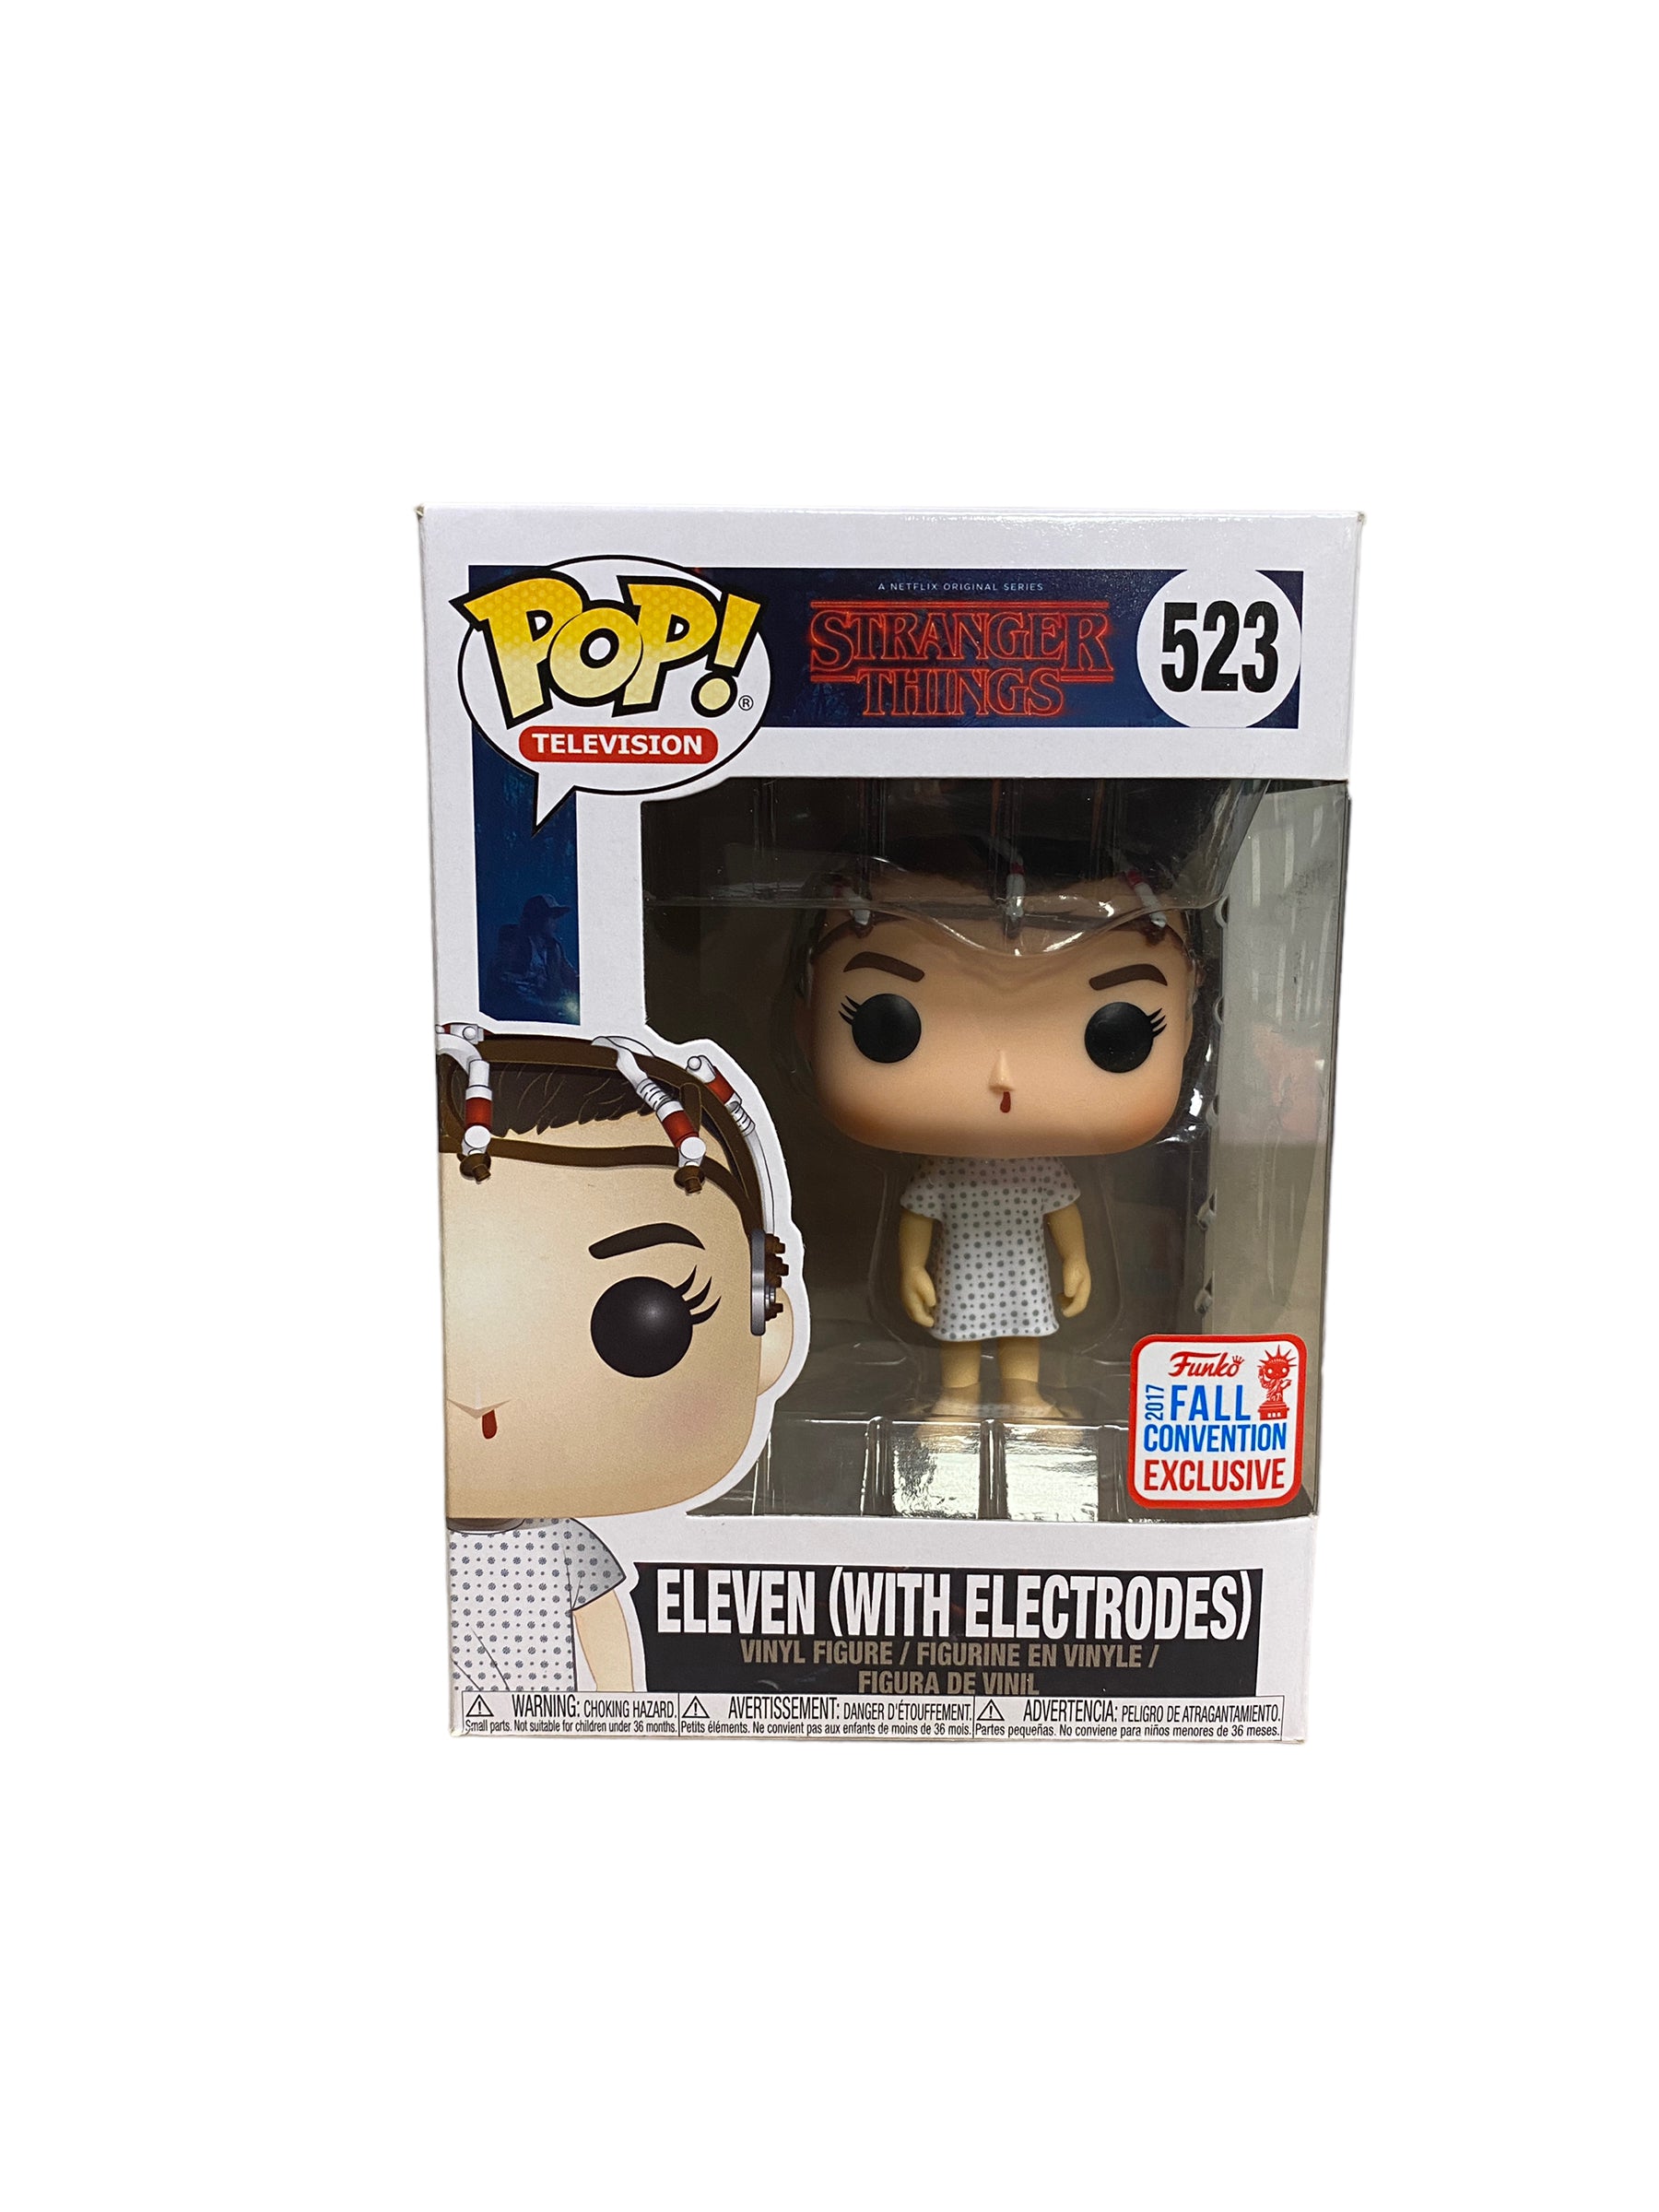 Eleven (With Electrodes) #523 Funko Pop! - Stranger Things - NYCC 2017 Shared Exclusive - Condition 8.25/10